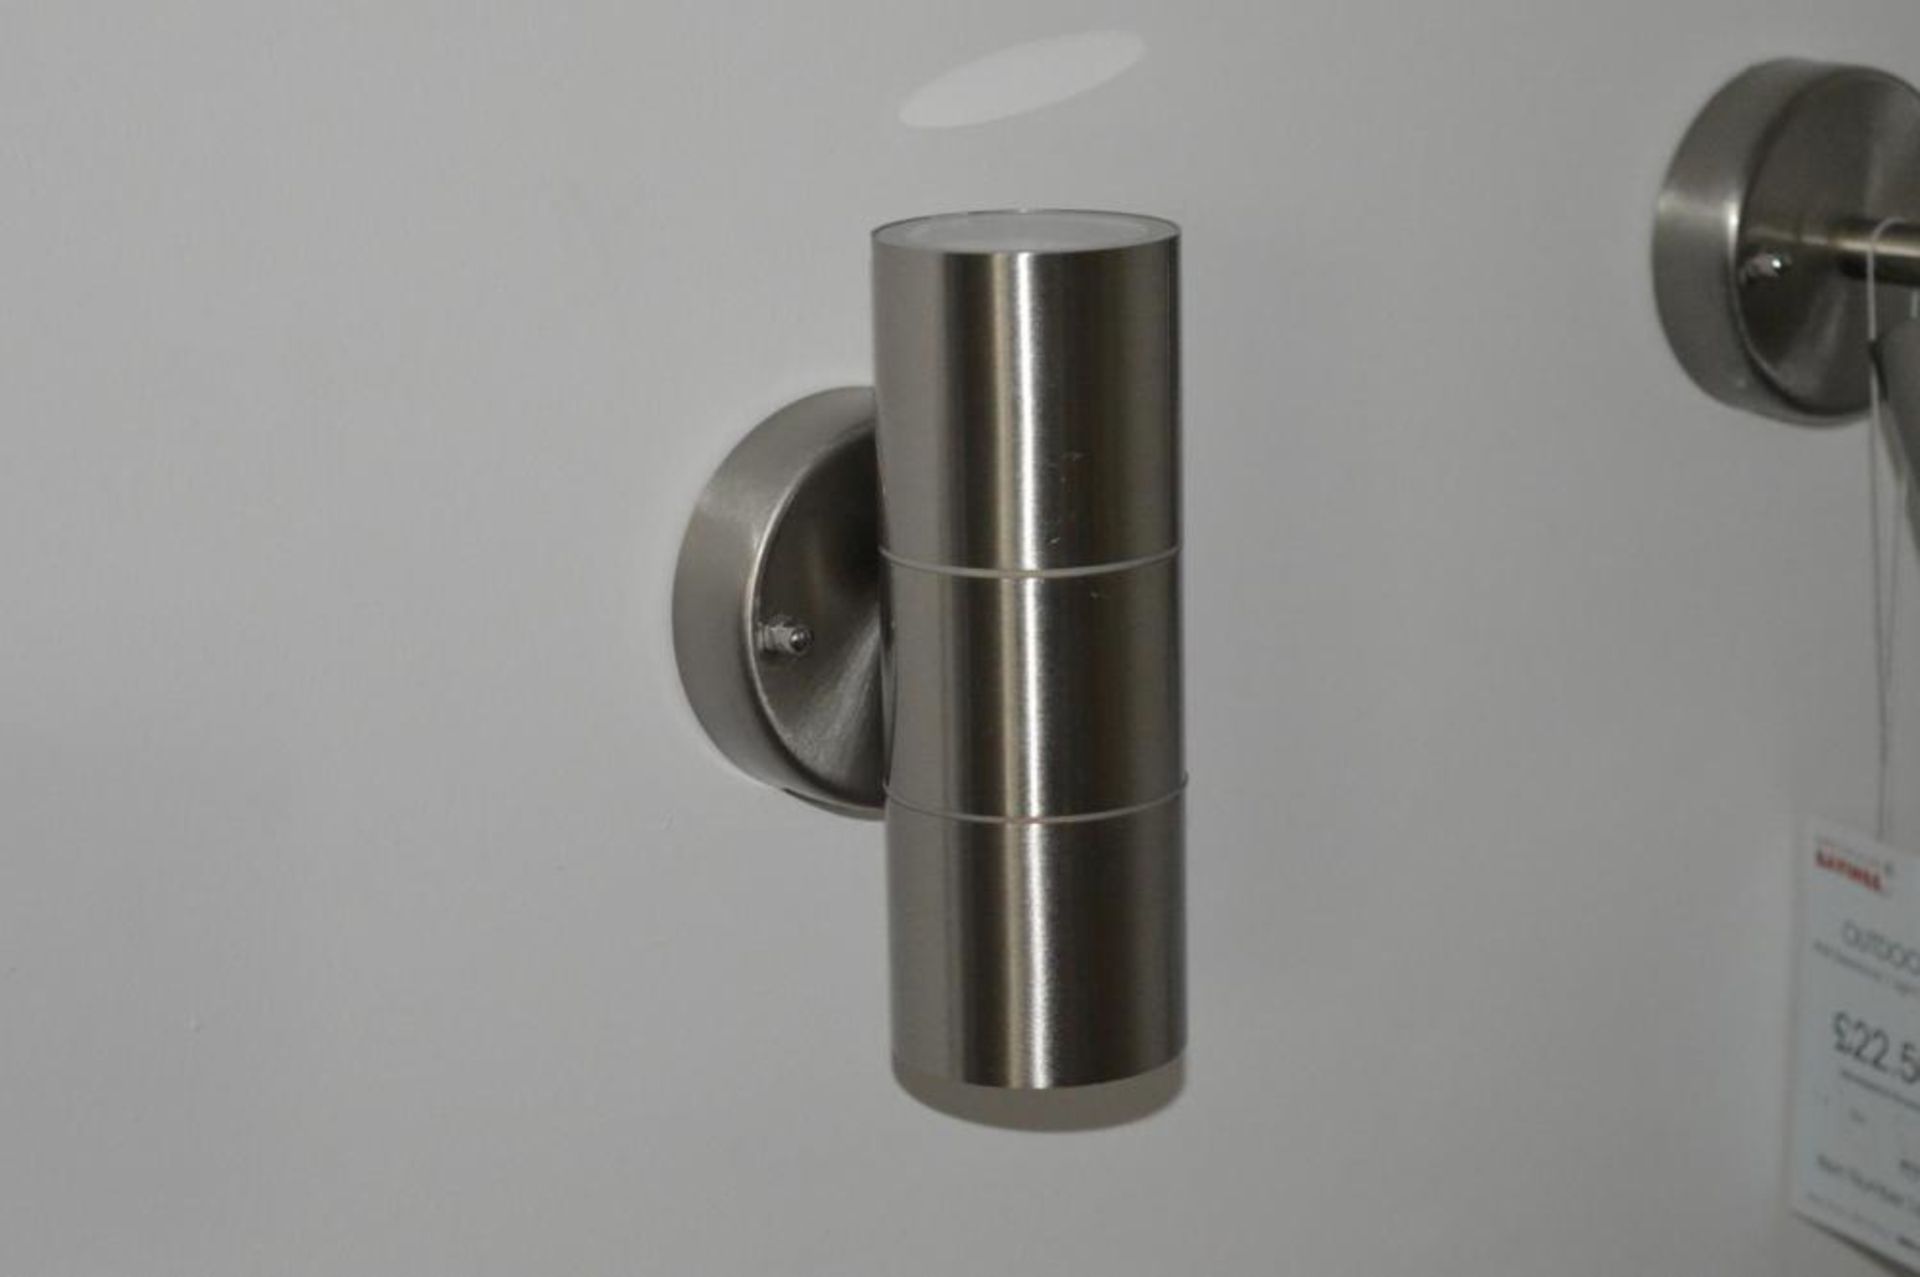 1 x Outdoor Directional Wall Light And A 2 Light Wall Bracket Finished In Stainless Steel - Ex Displ - Image 3 of 6